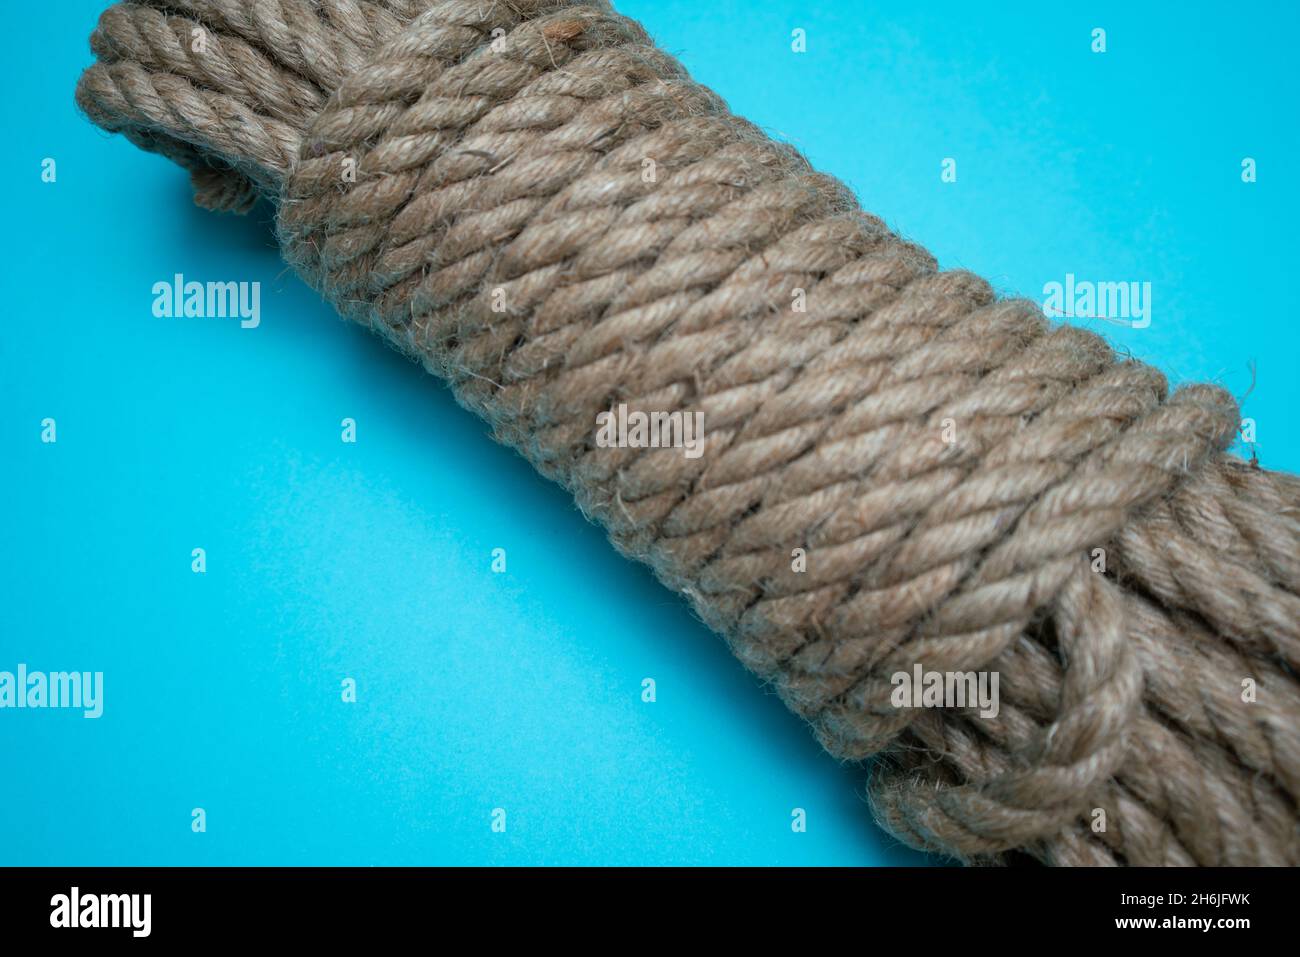 a fresh coil of new rope against a blue background Stock Photo